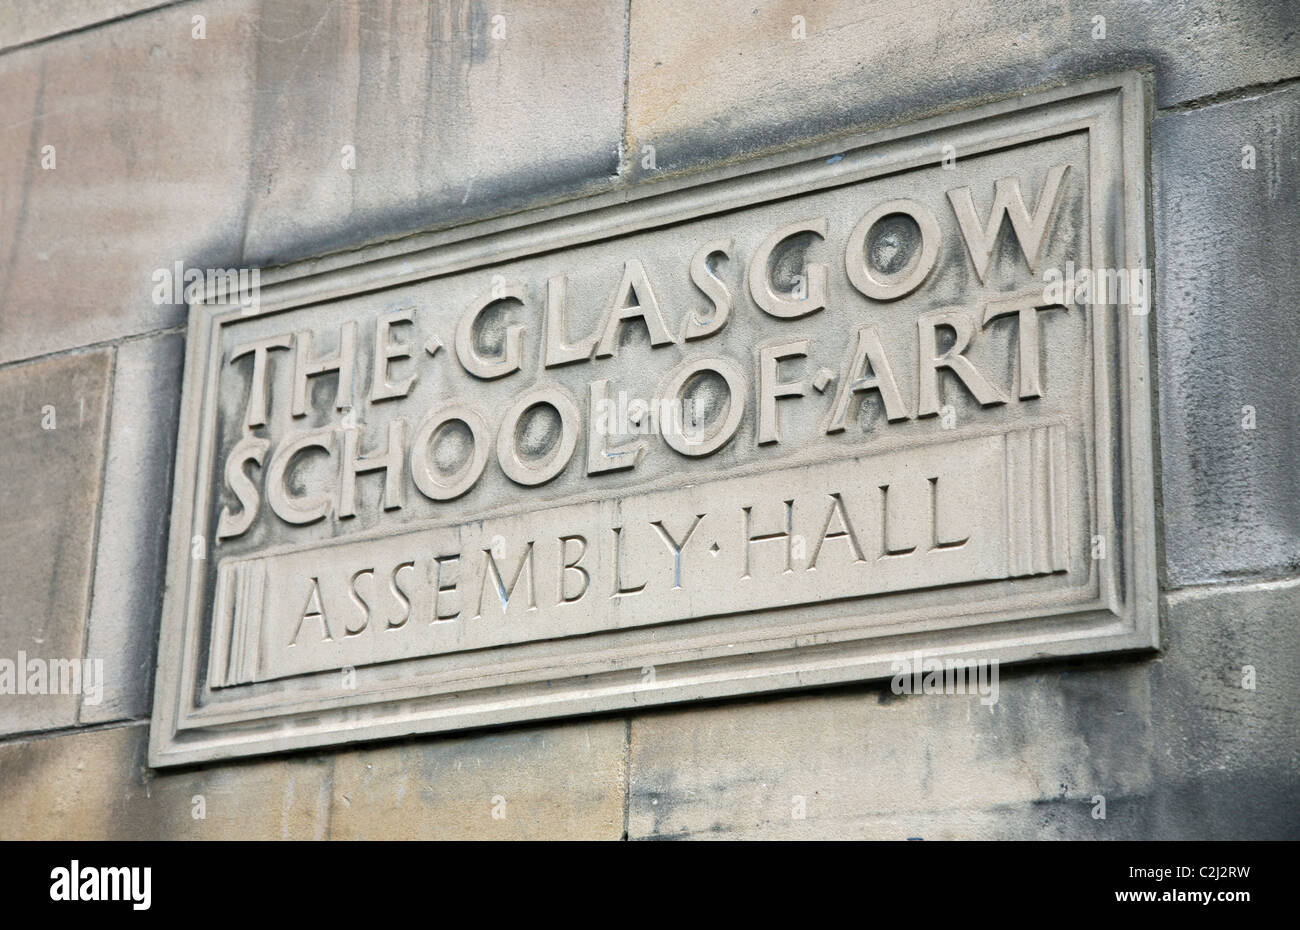 Photo taken before the fires of a sign carved into the stone of the Charles Rennie Mackintosh designed Glasgow School of Art, Scotland, UK Stock Photo